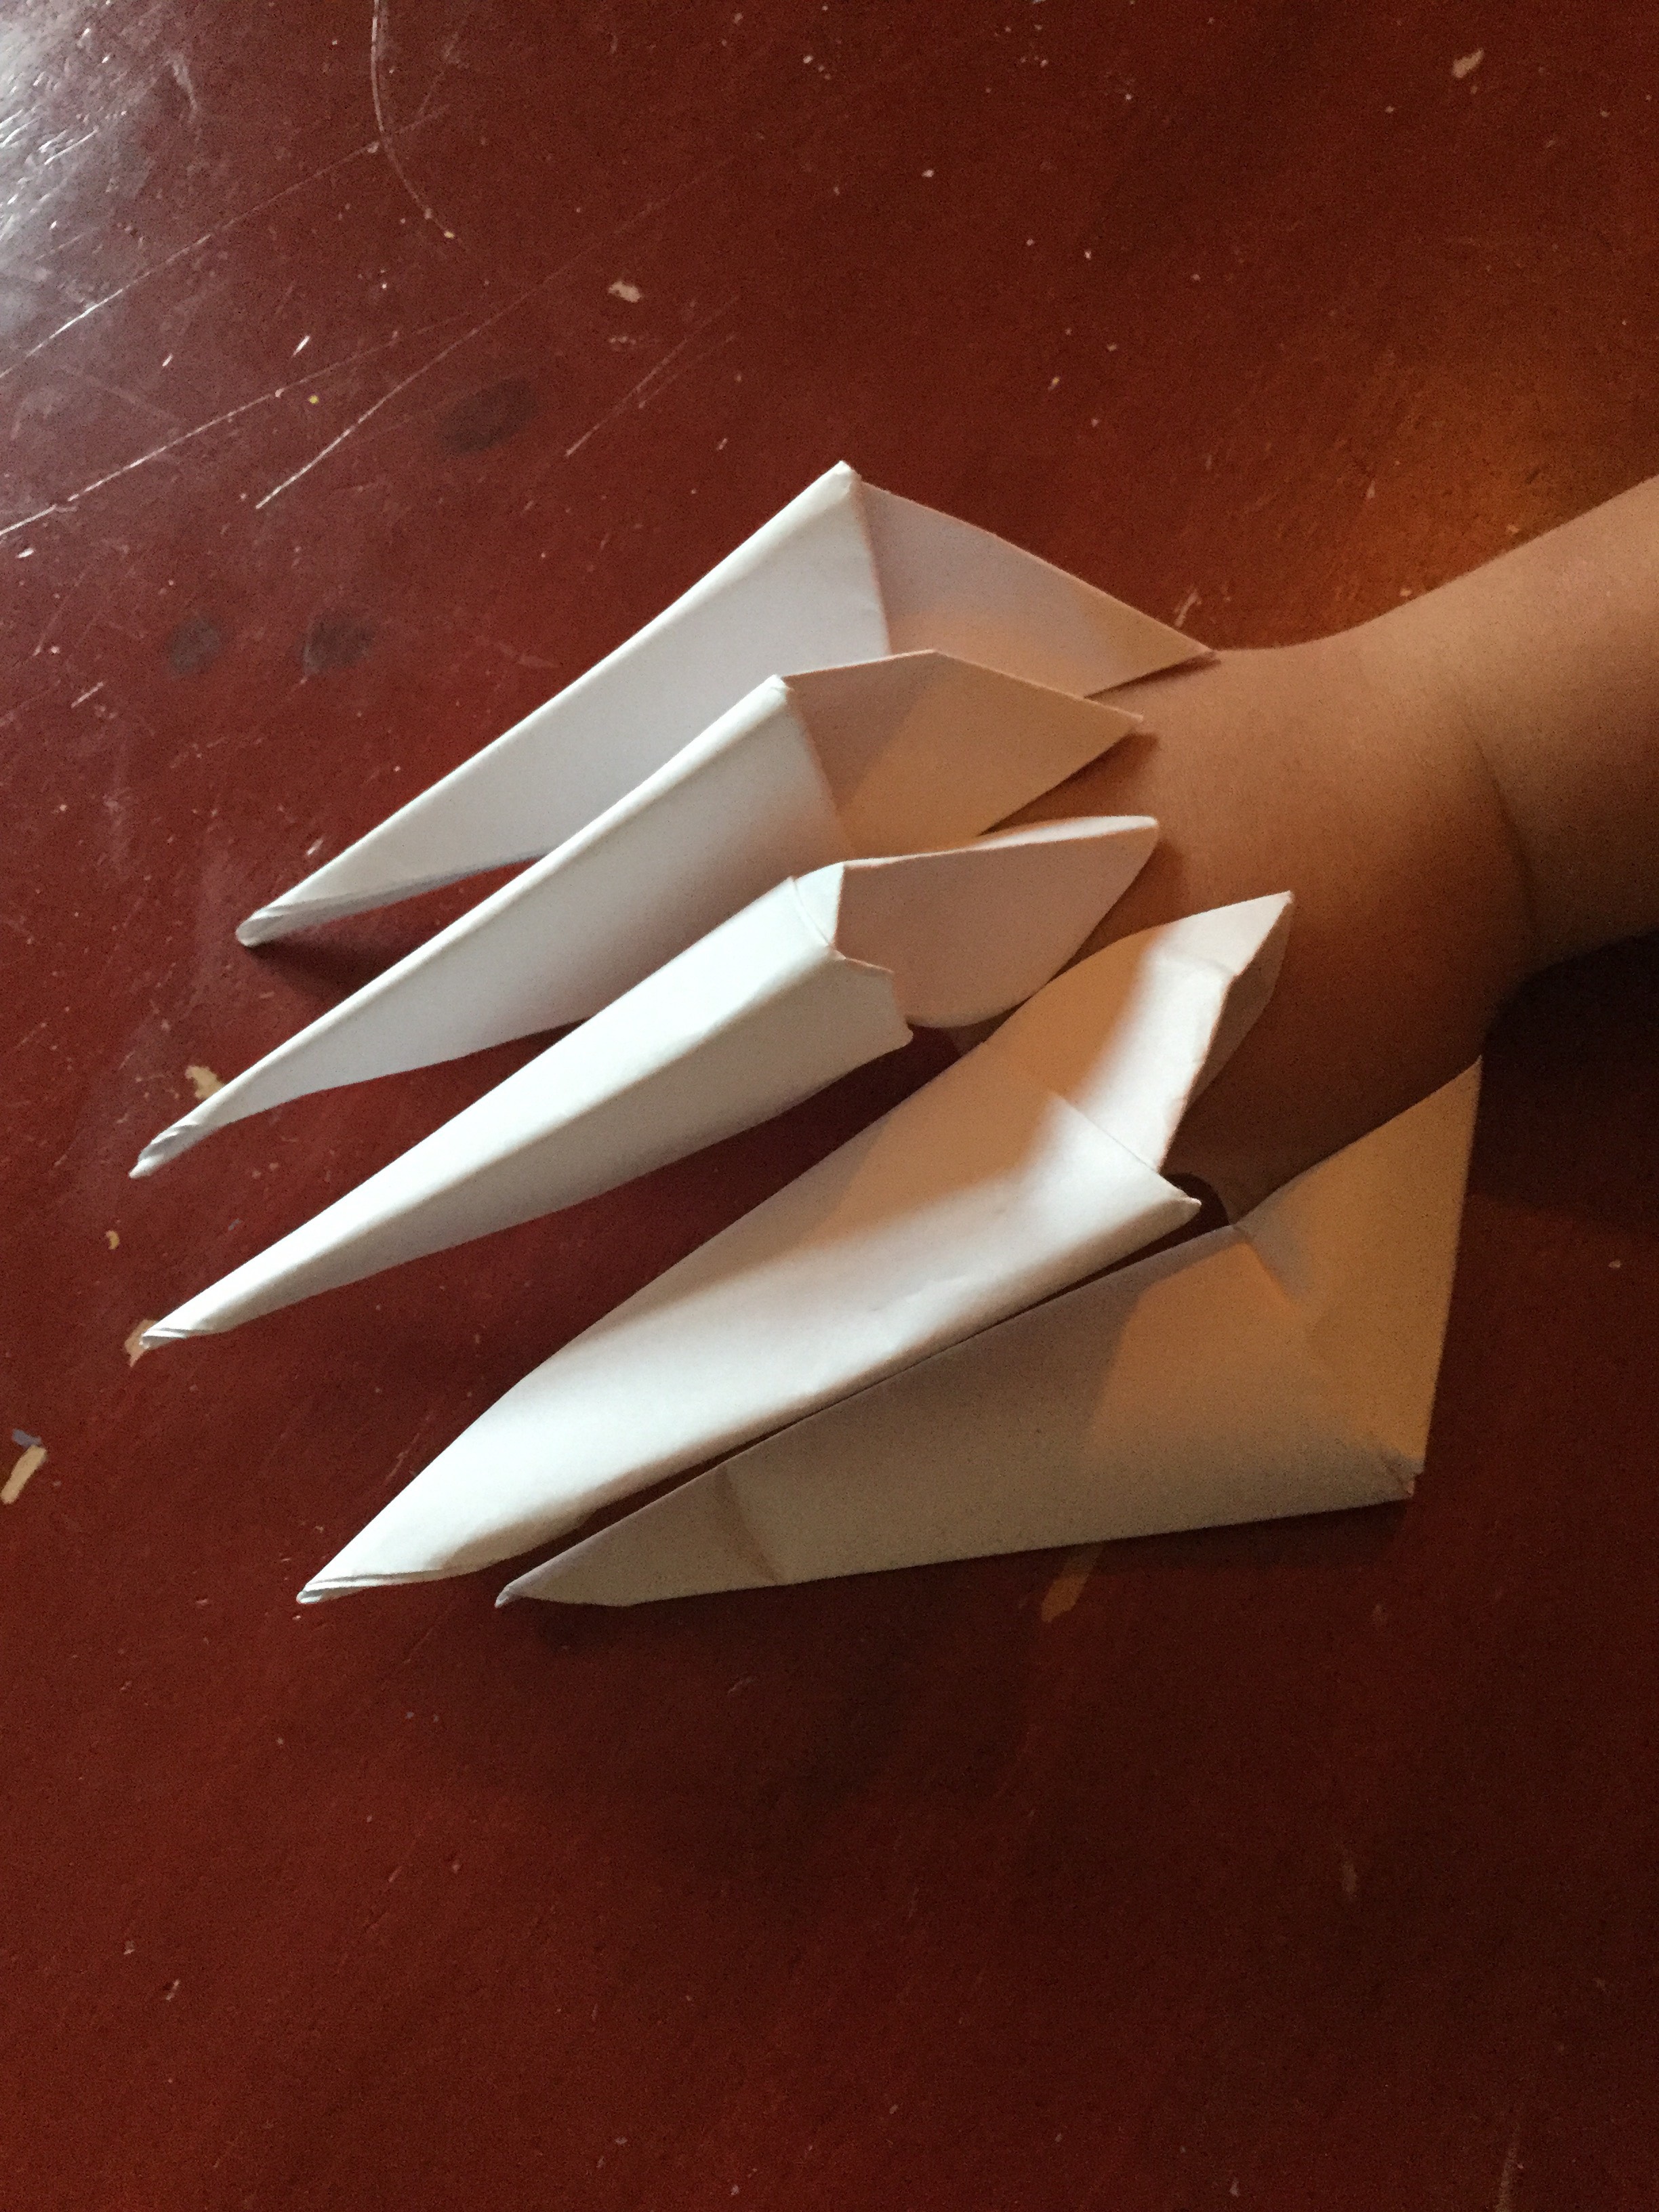 Origami Claws